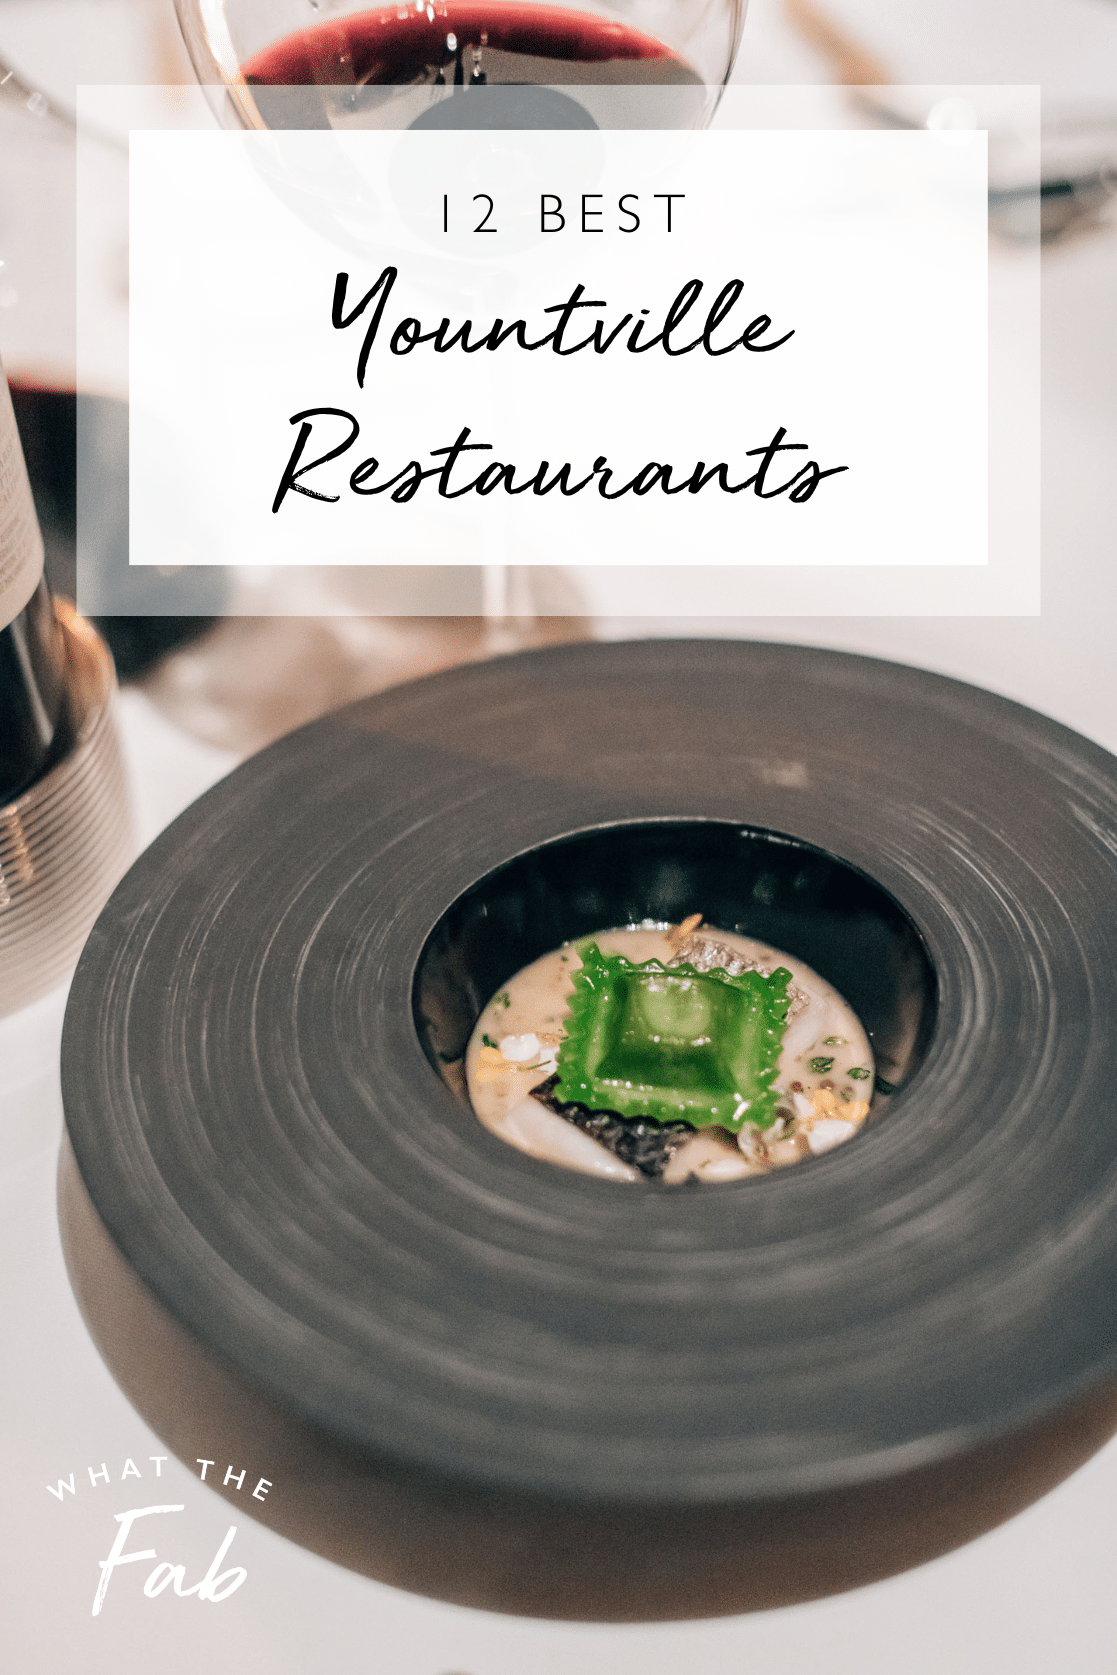 The 12 Best Yountville Restaurants, by Travel Blogger What The Fab